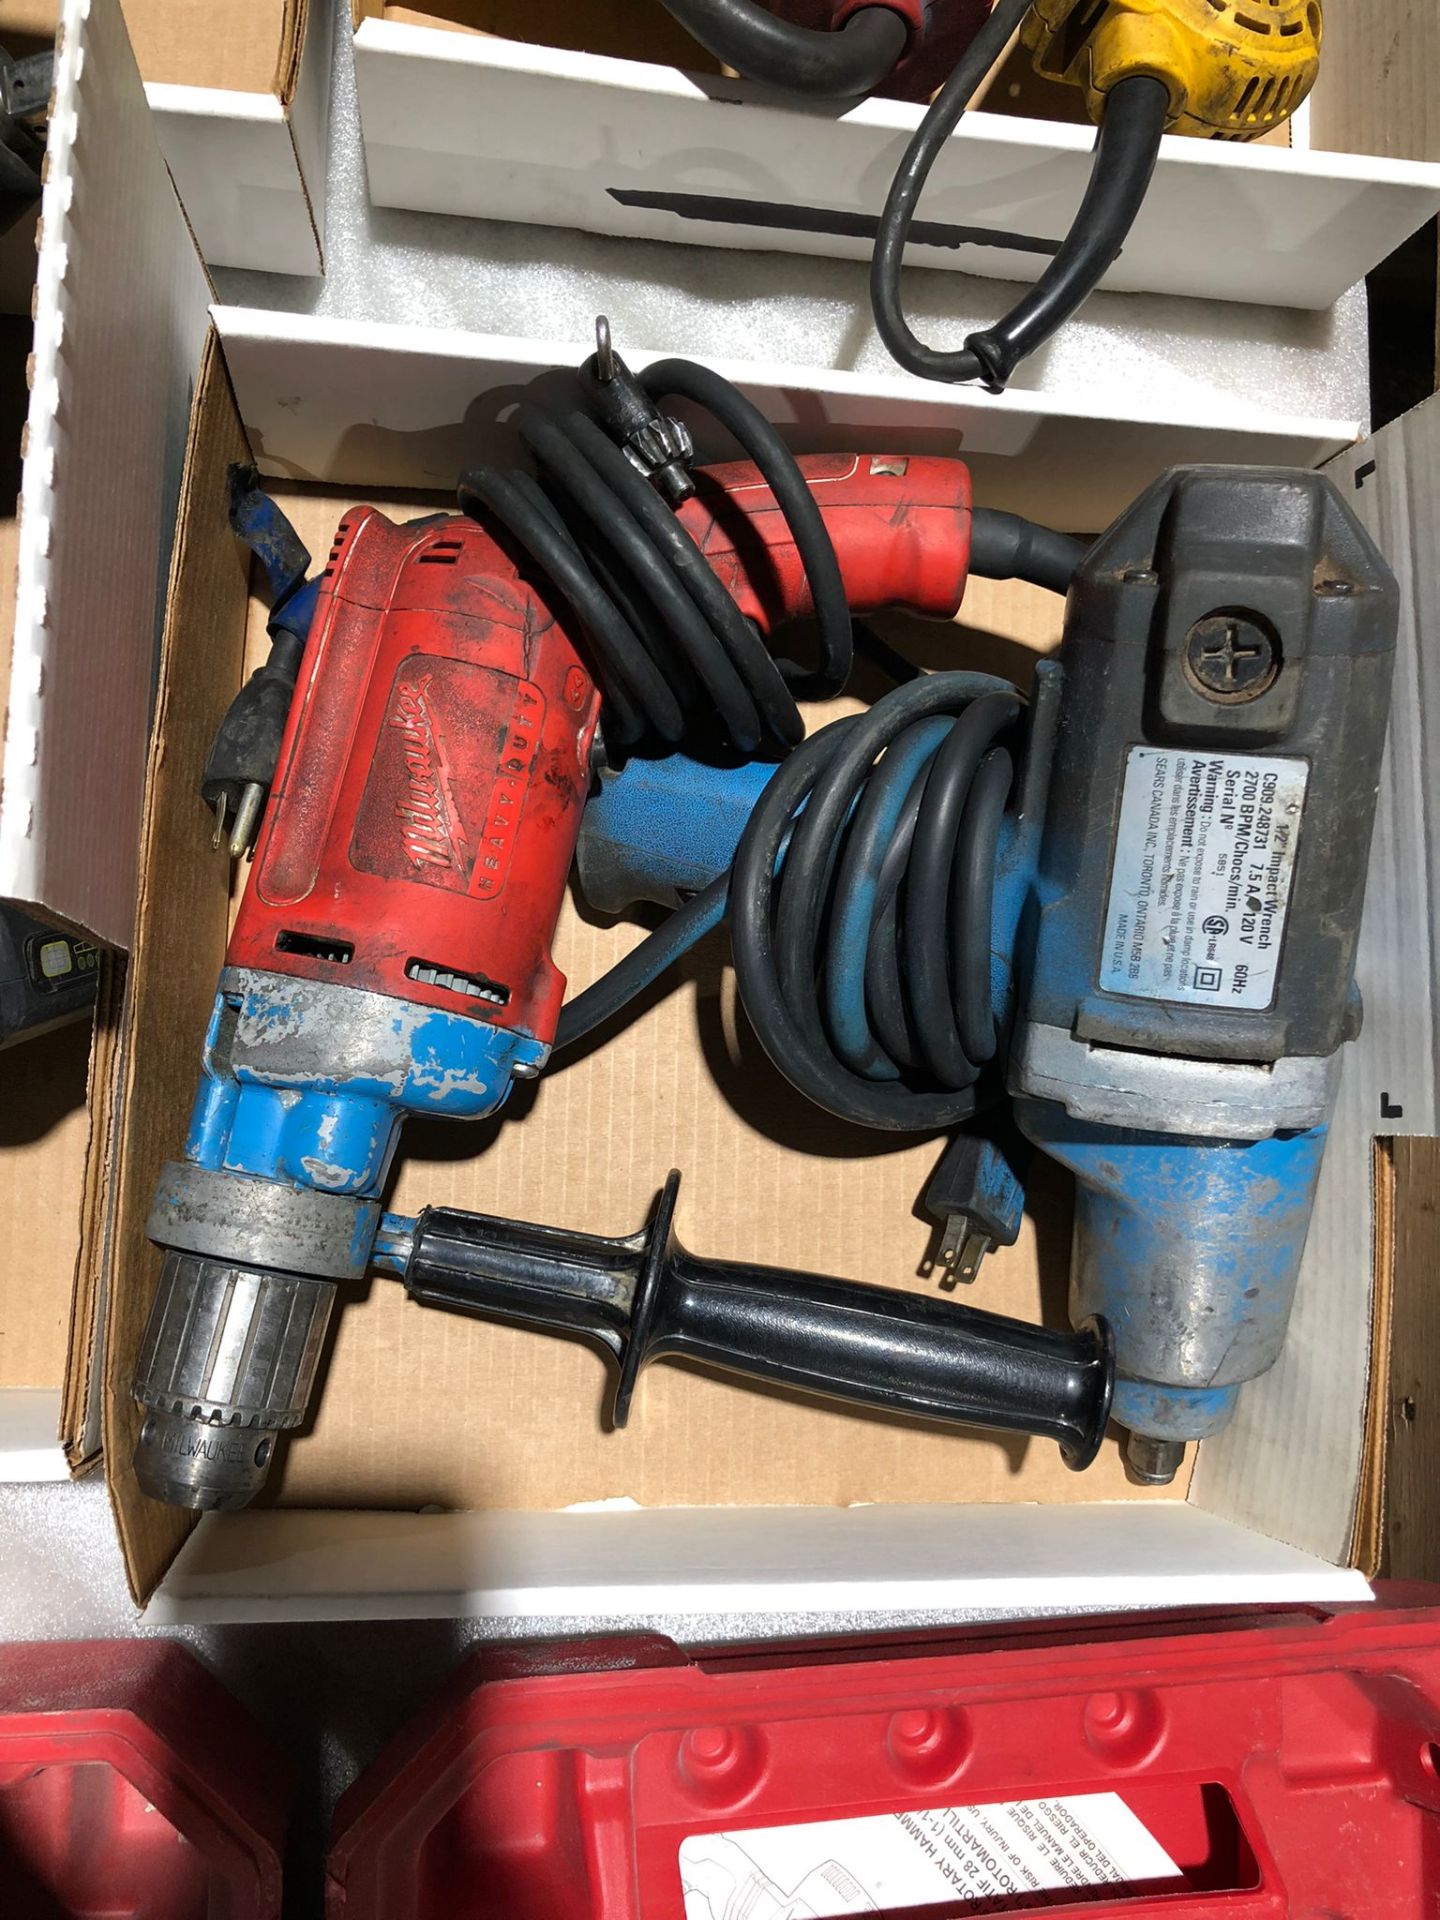 Lot of 2 (2 units) Impact Wrench & Milwaukee Drill Unit